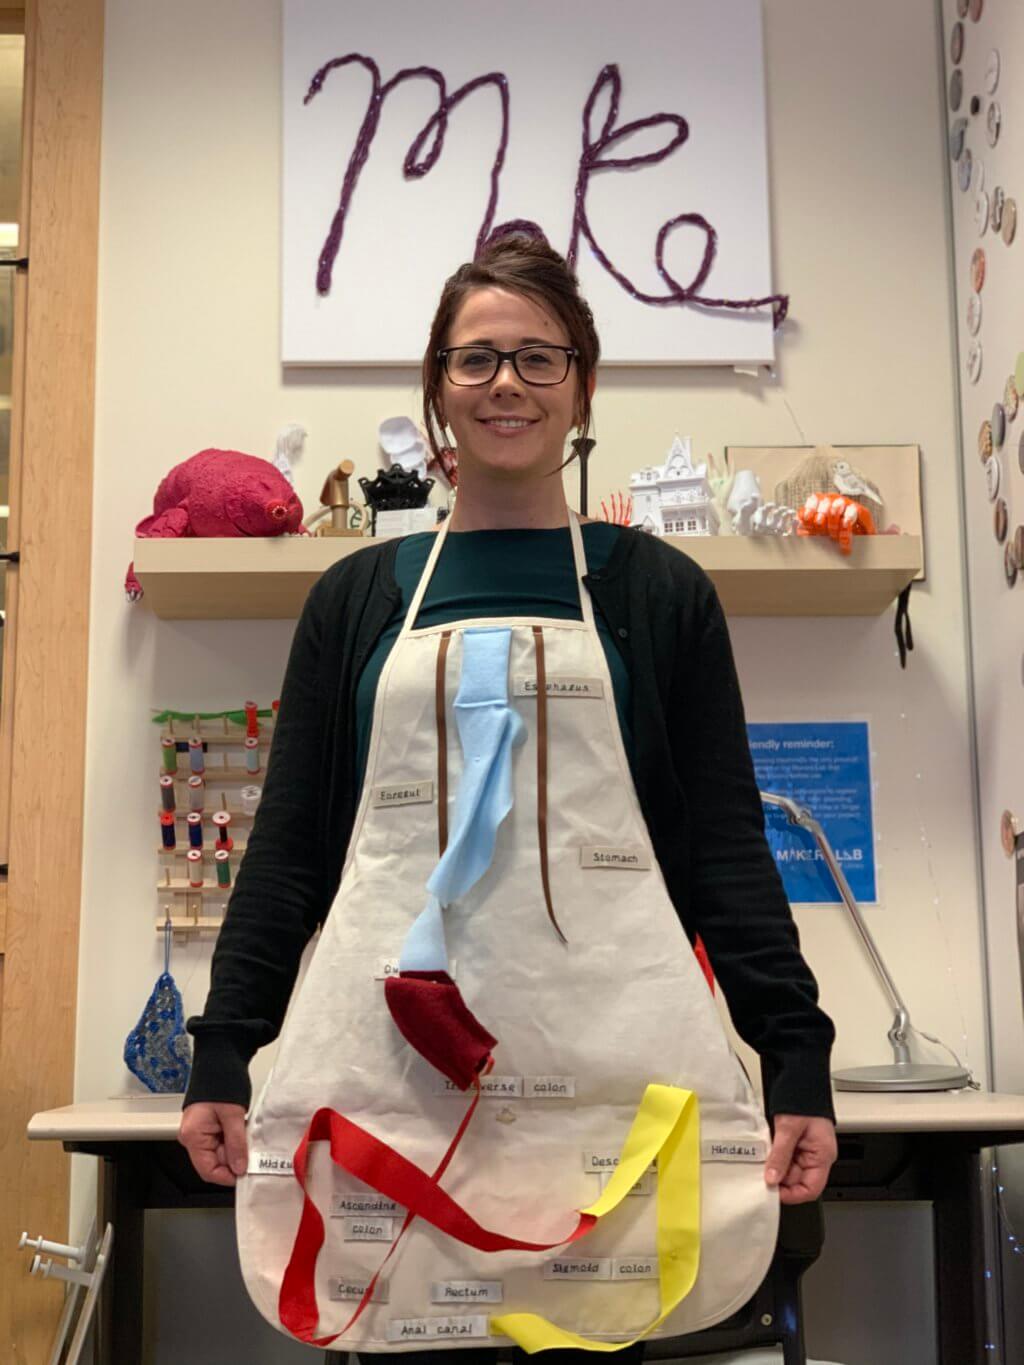 Dr. Klein wearing the finished apron